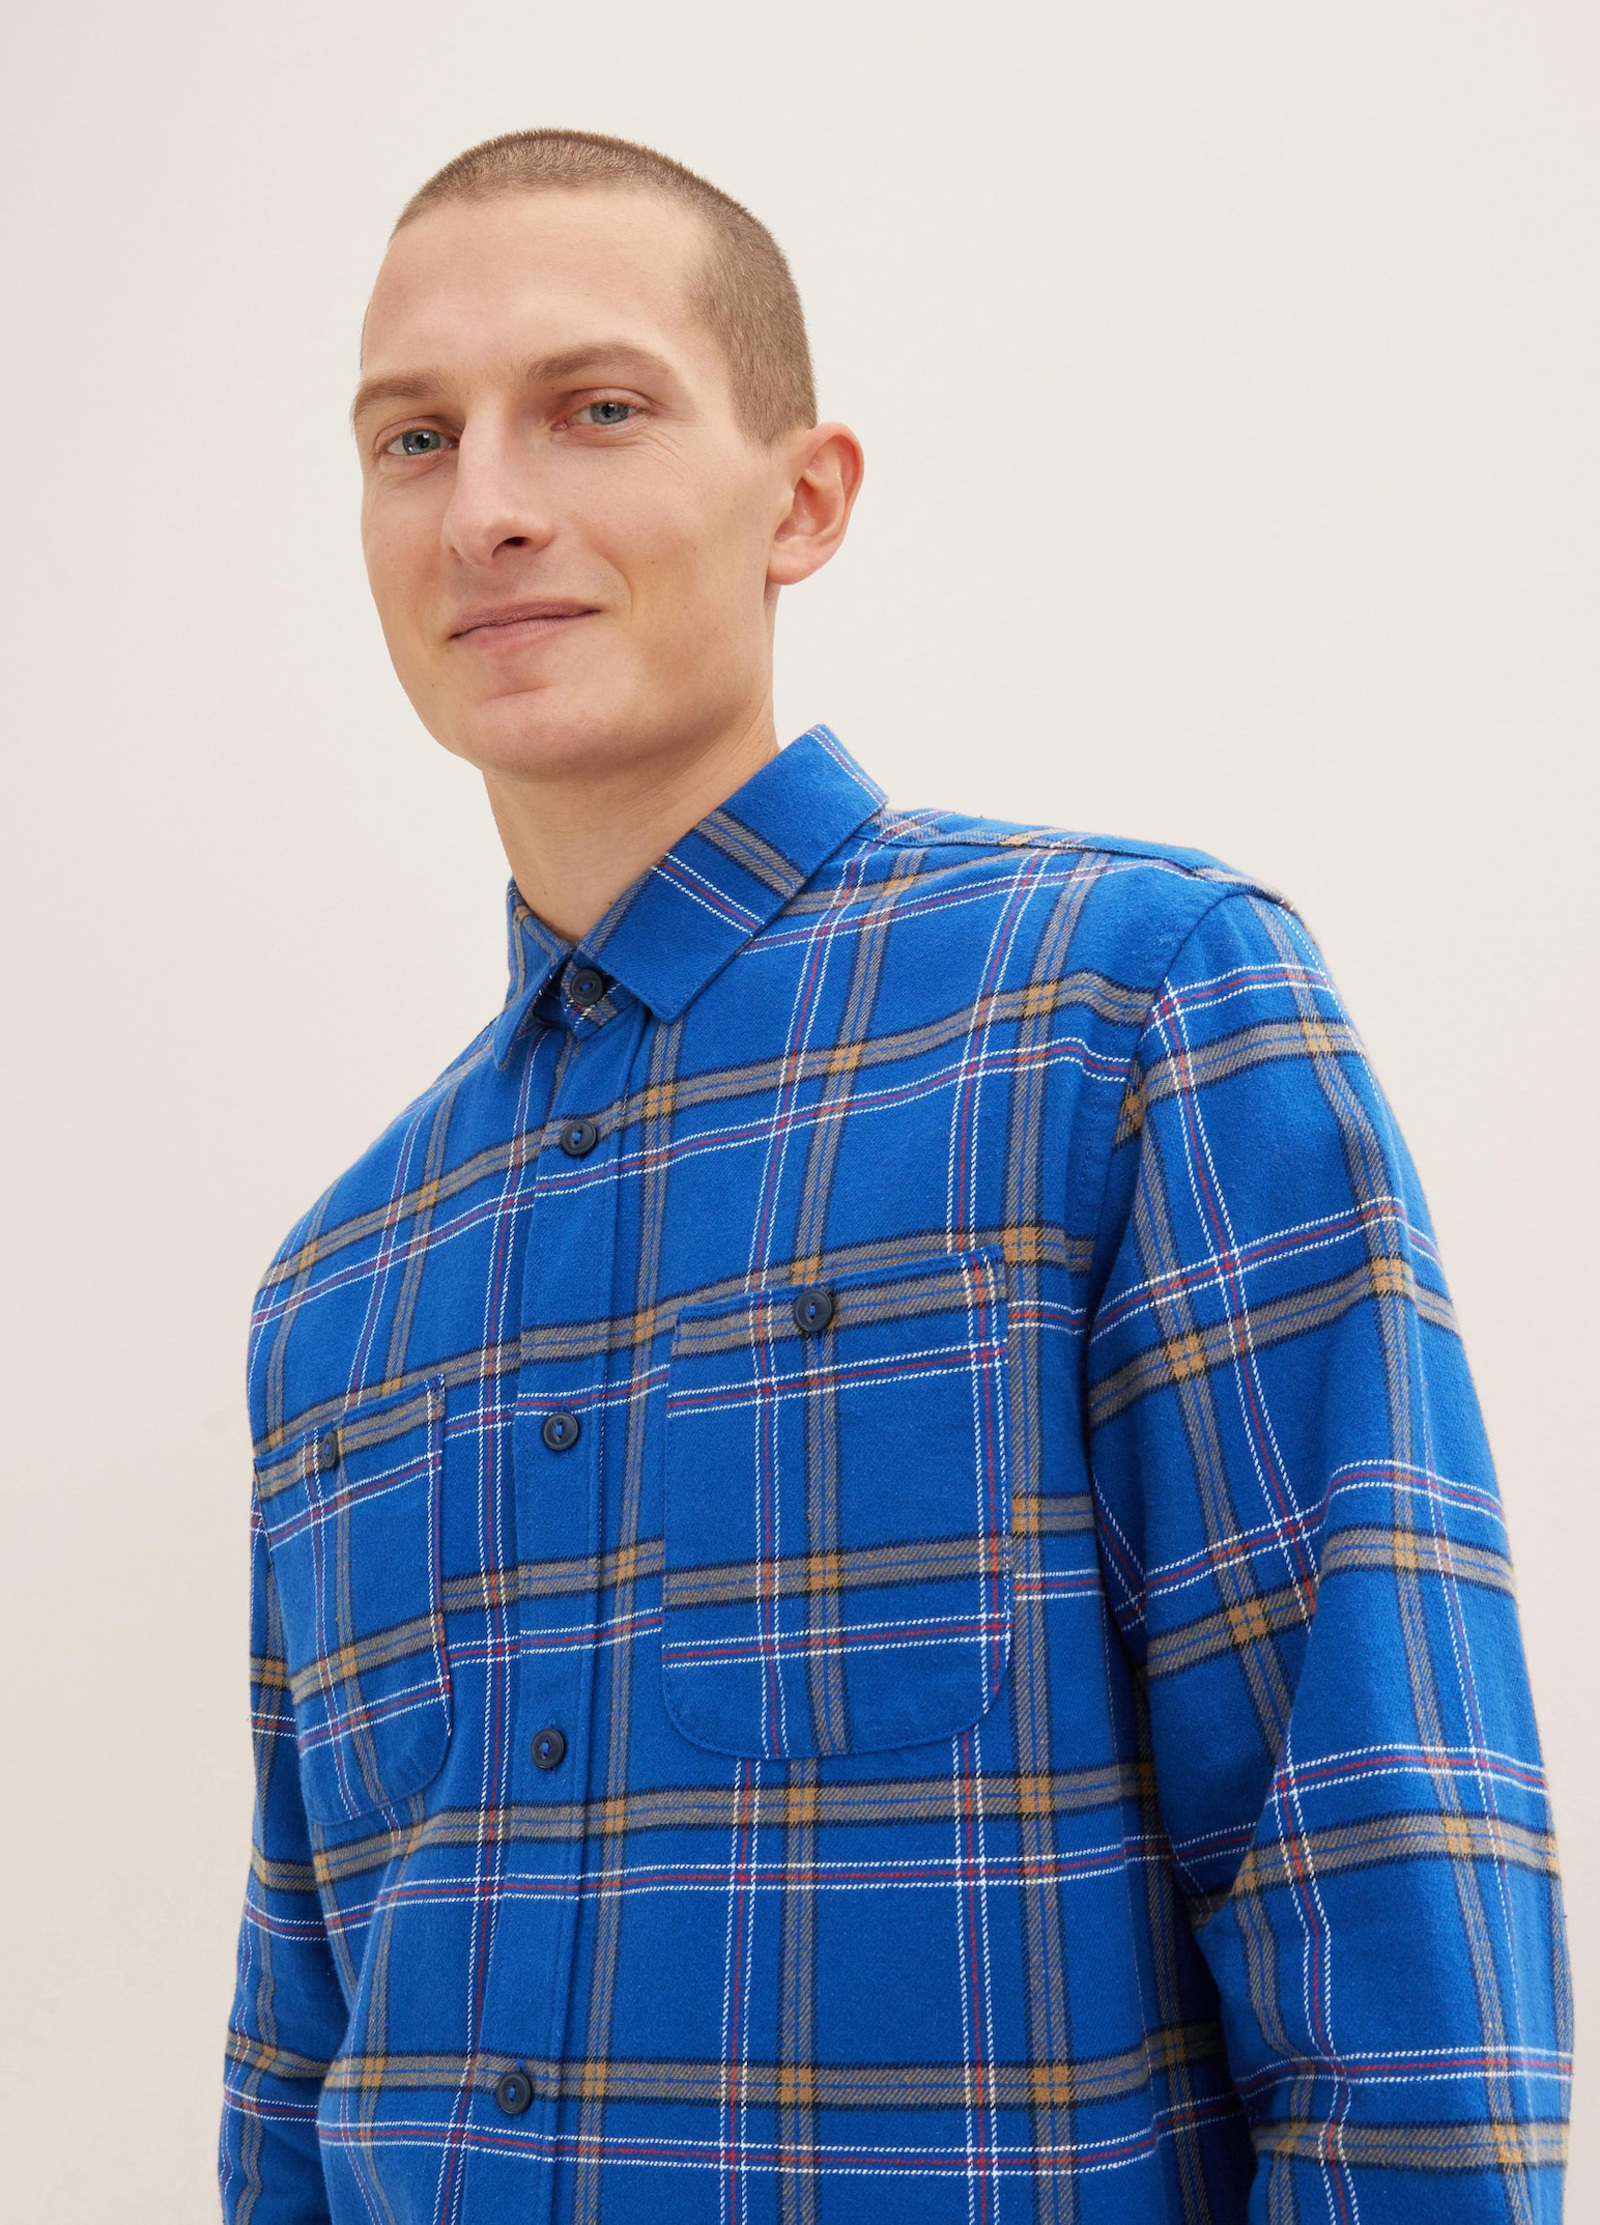 Tom Tailor® Shirt - Hockey Colorful Check M Blue Size